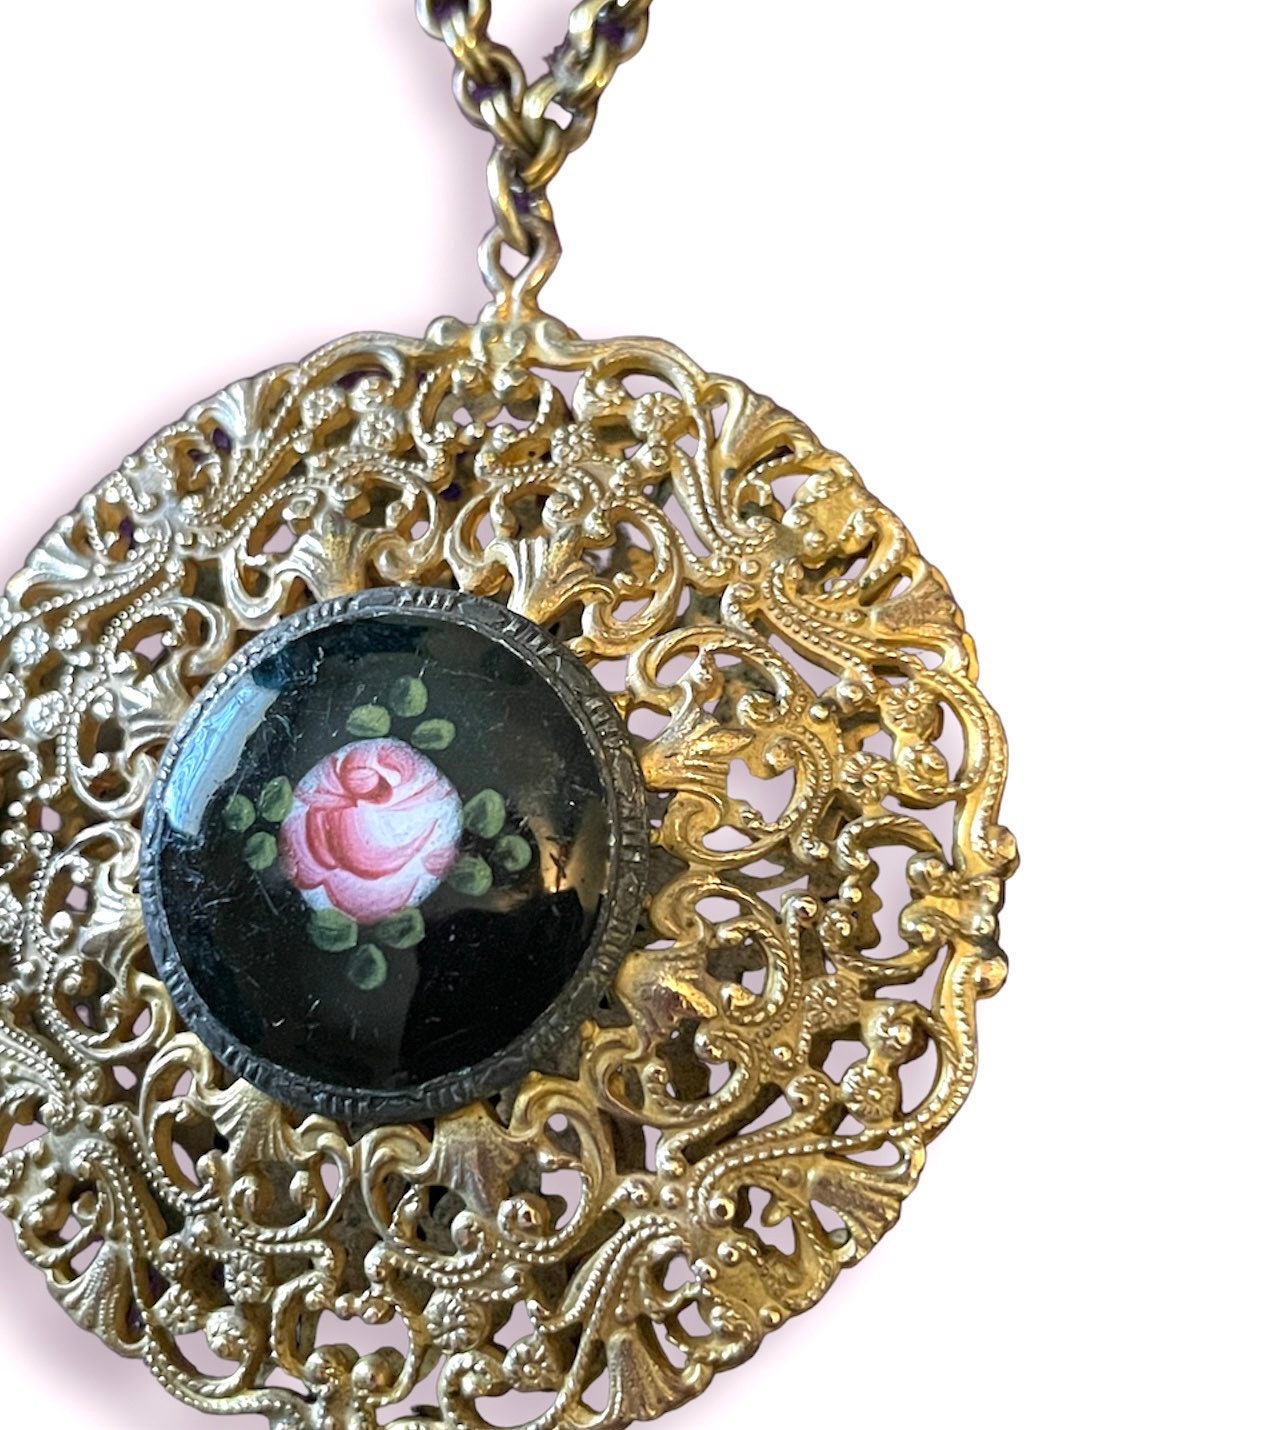 Vintage Black & Pink Cloisonné Rose Cameo in Heavy Brass Filigree Openwork Necklace